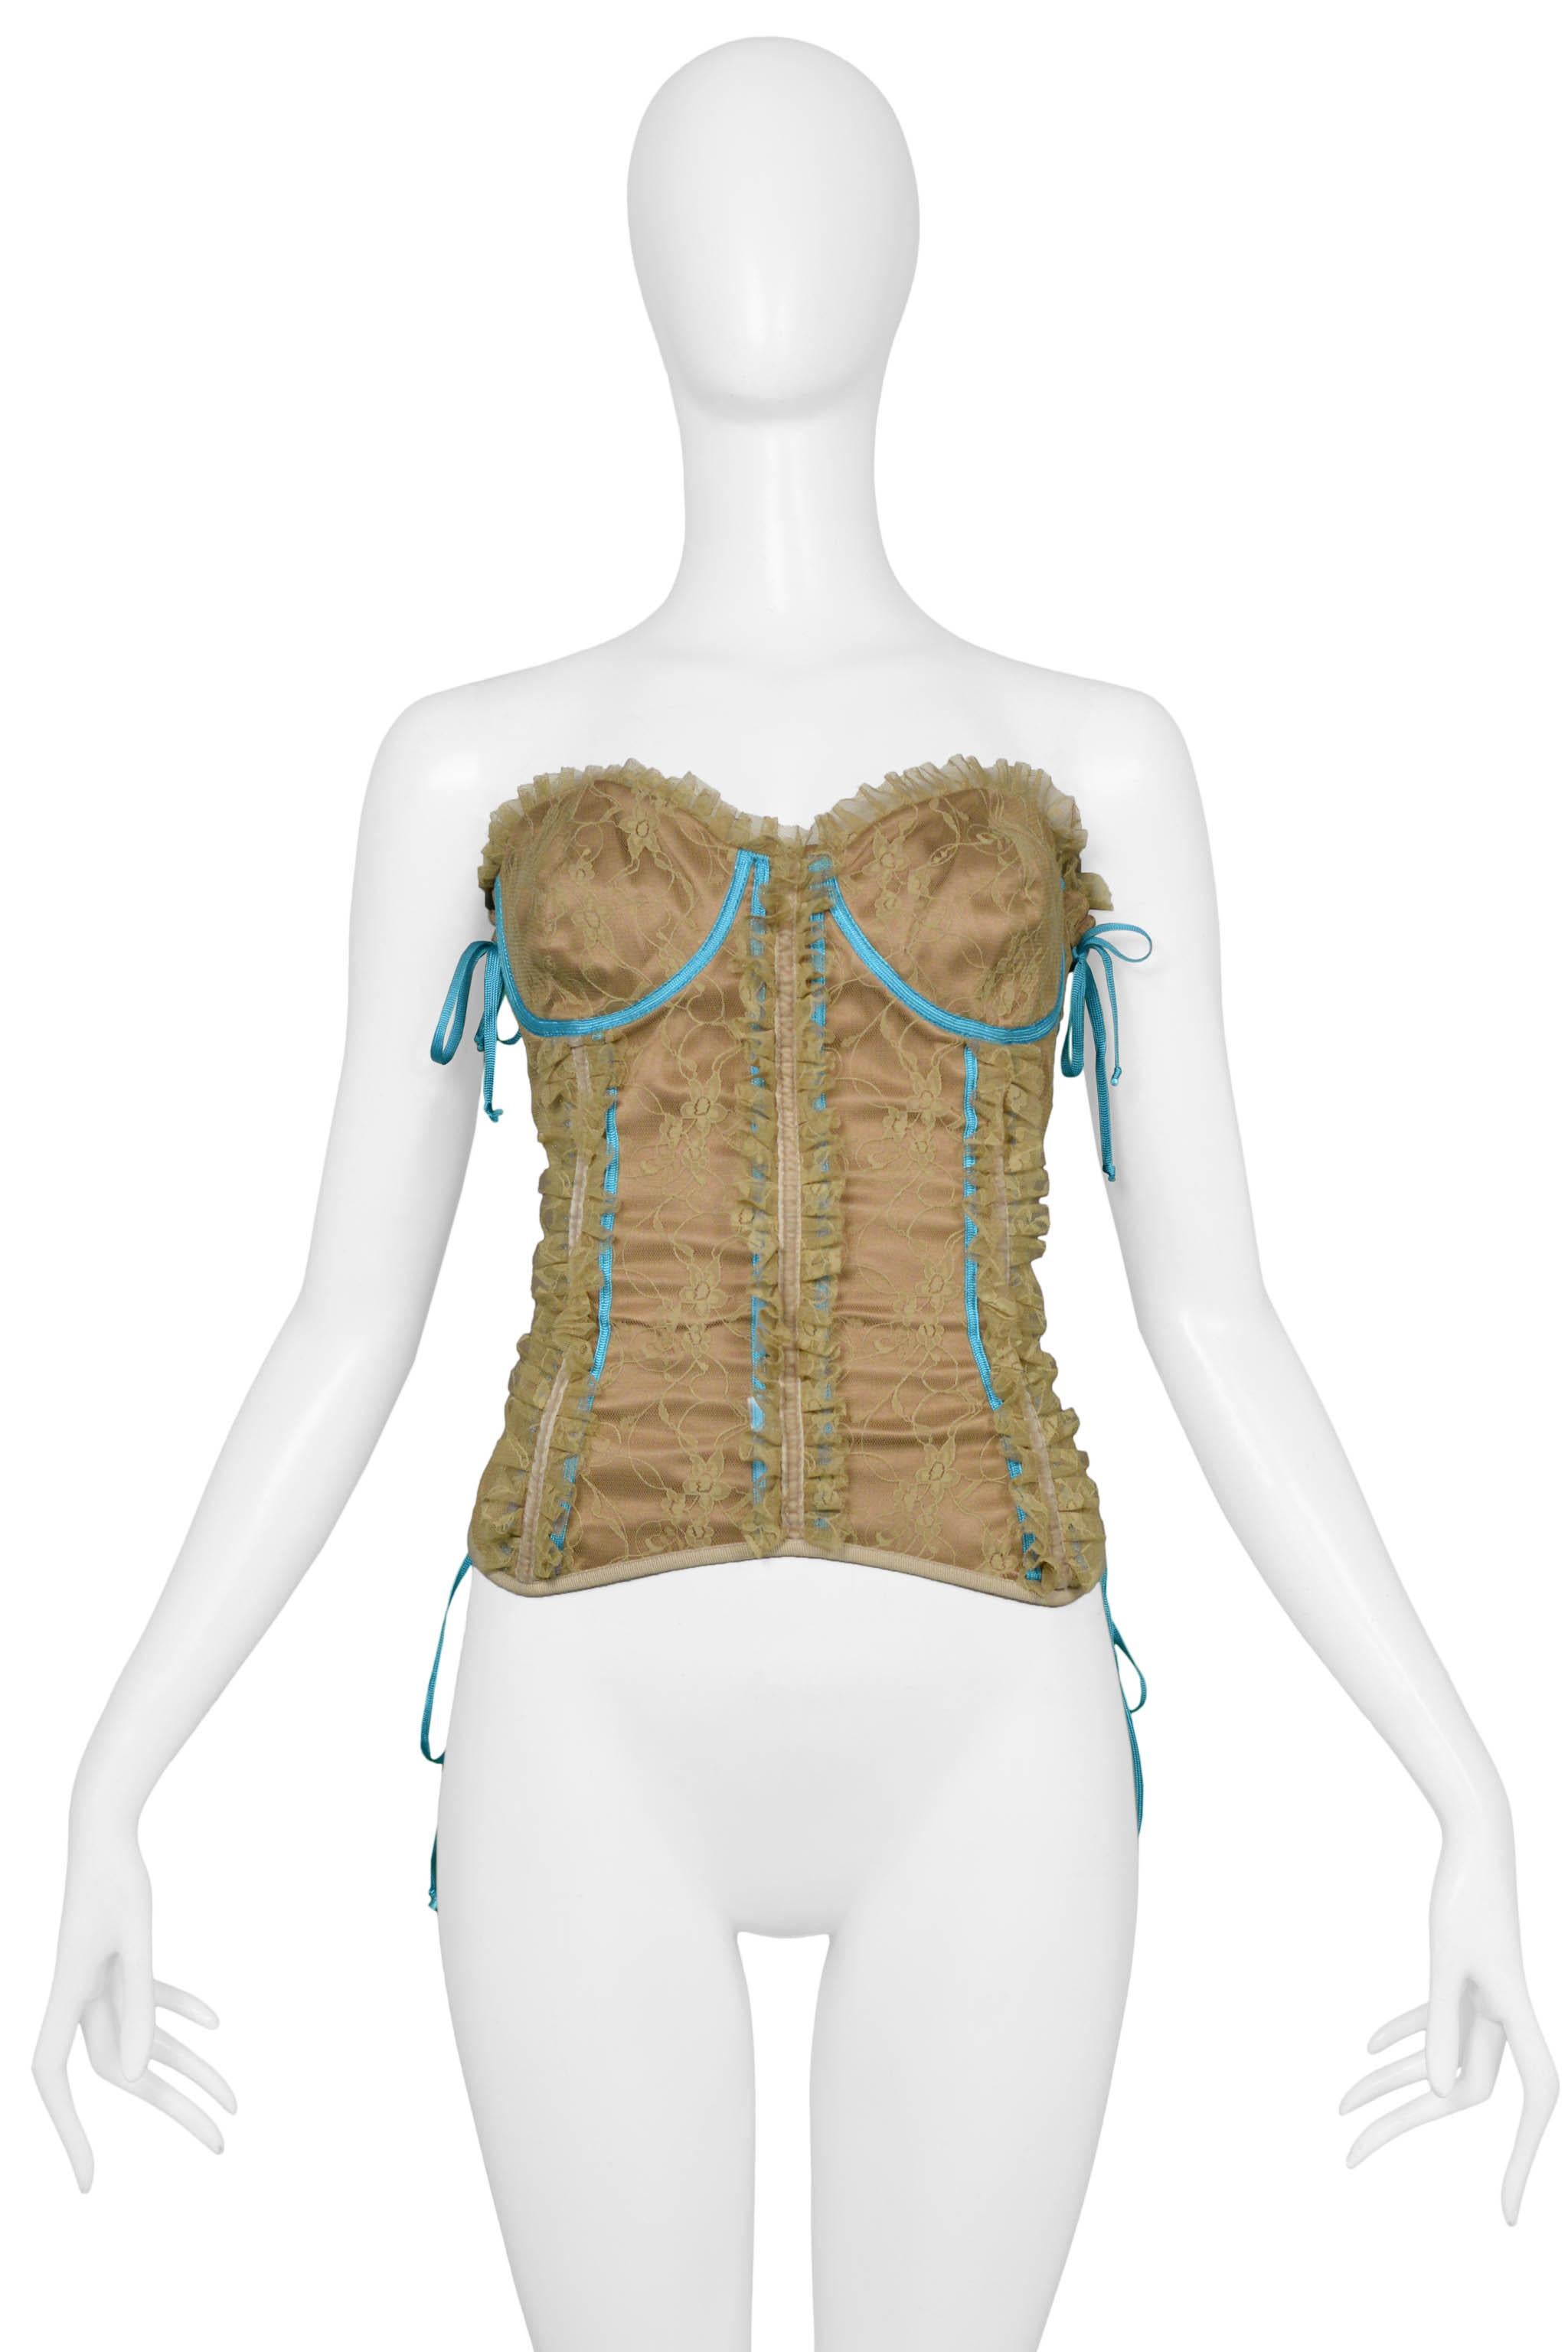 Brown Dolce & Gabbana Lace Corset Top With Blue Laces 2002 For Sale